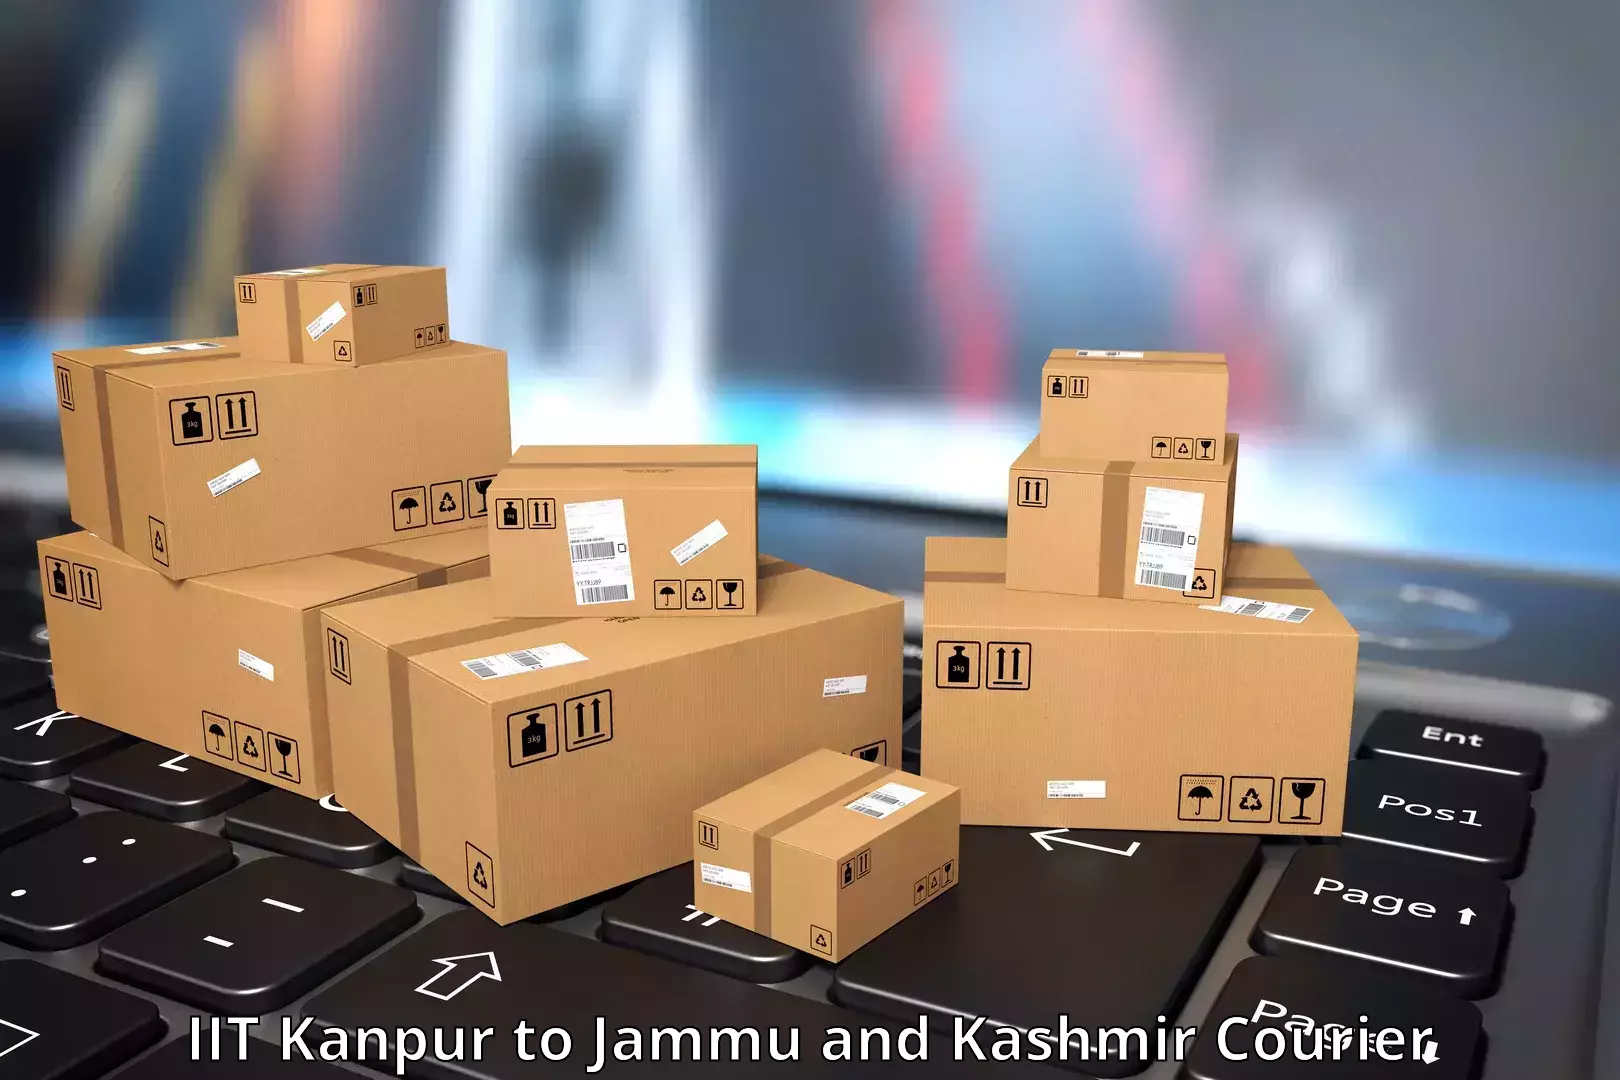 Courier service comparison IIT Kanpur to Pulwama